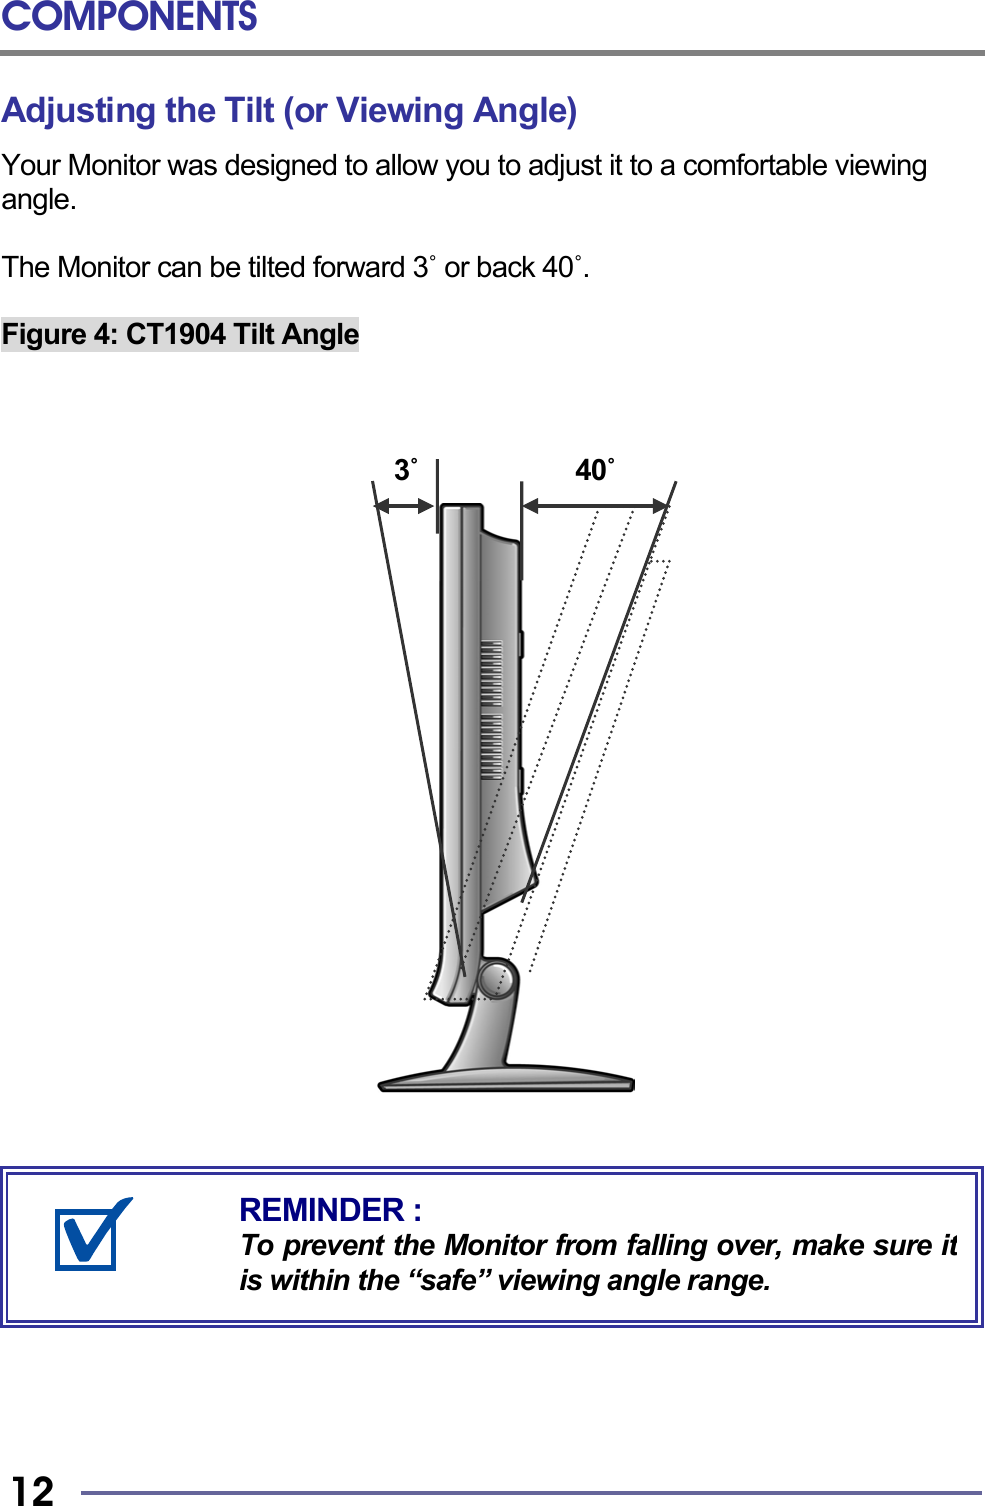 COMPONENTS   12 Adjusting the Tilt (or Viewing Angle) Your Monitor was designed to allow you to adjust it to a comfortable viewing angle.  The Monitor can be tilted forward 3˚ or back 40˚.  Figure 4: CT1904 Tilt Angle                                  3˚            40˚                                  REMINDER : To prevent the Monitor from falling over, make sure itis within the “safe” viewing angle range. 